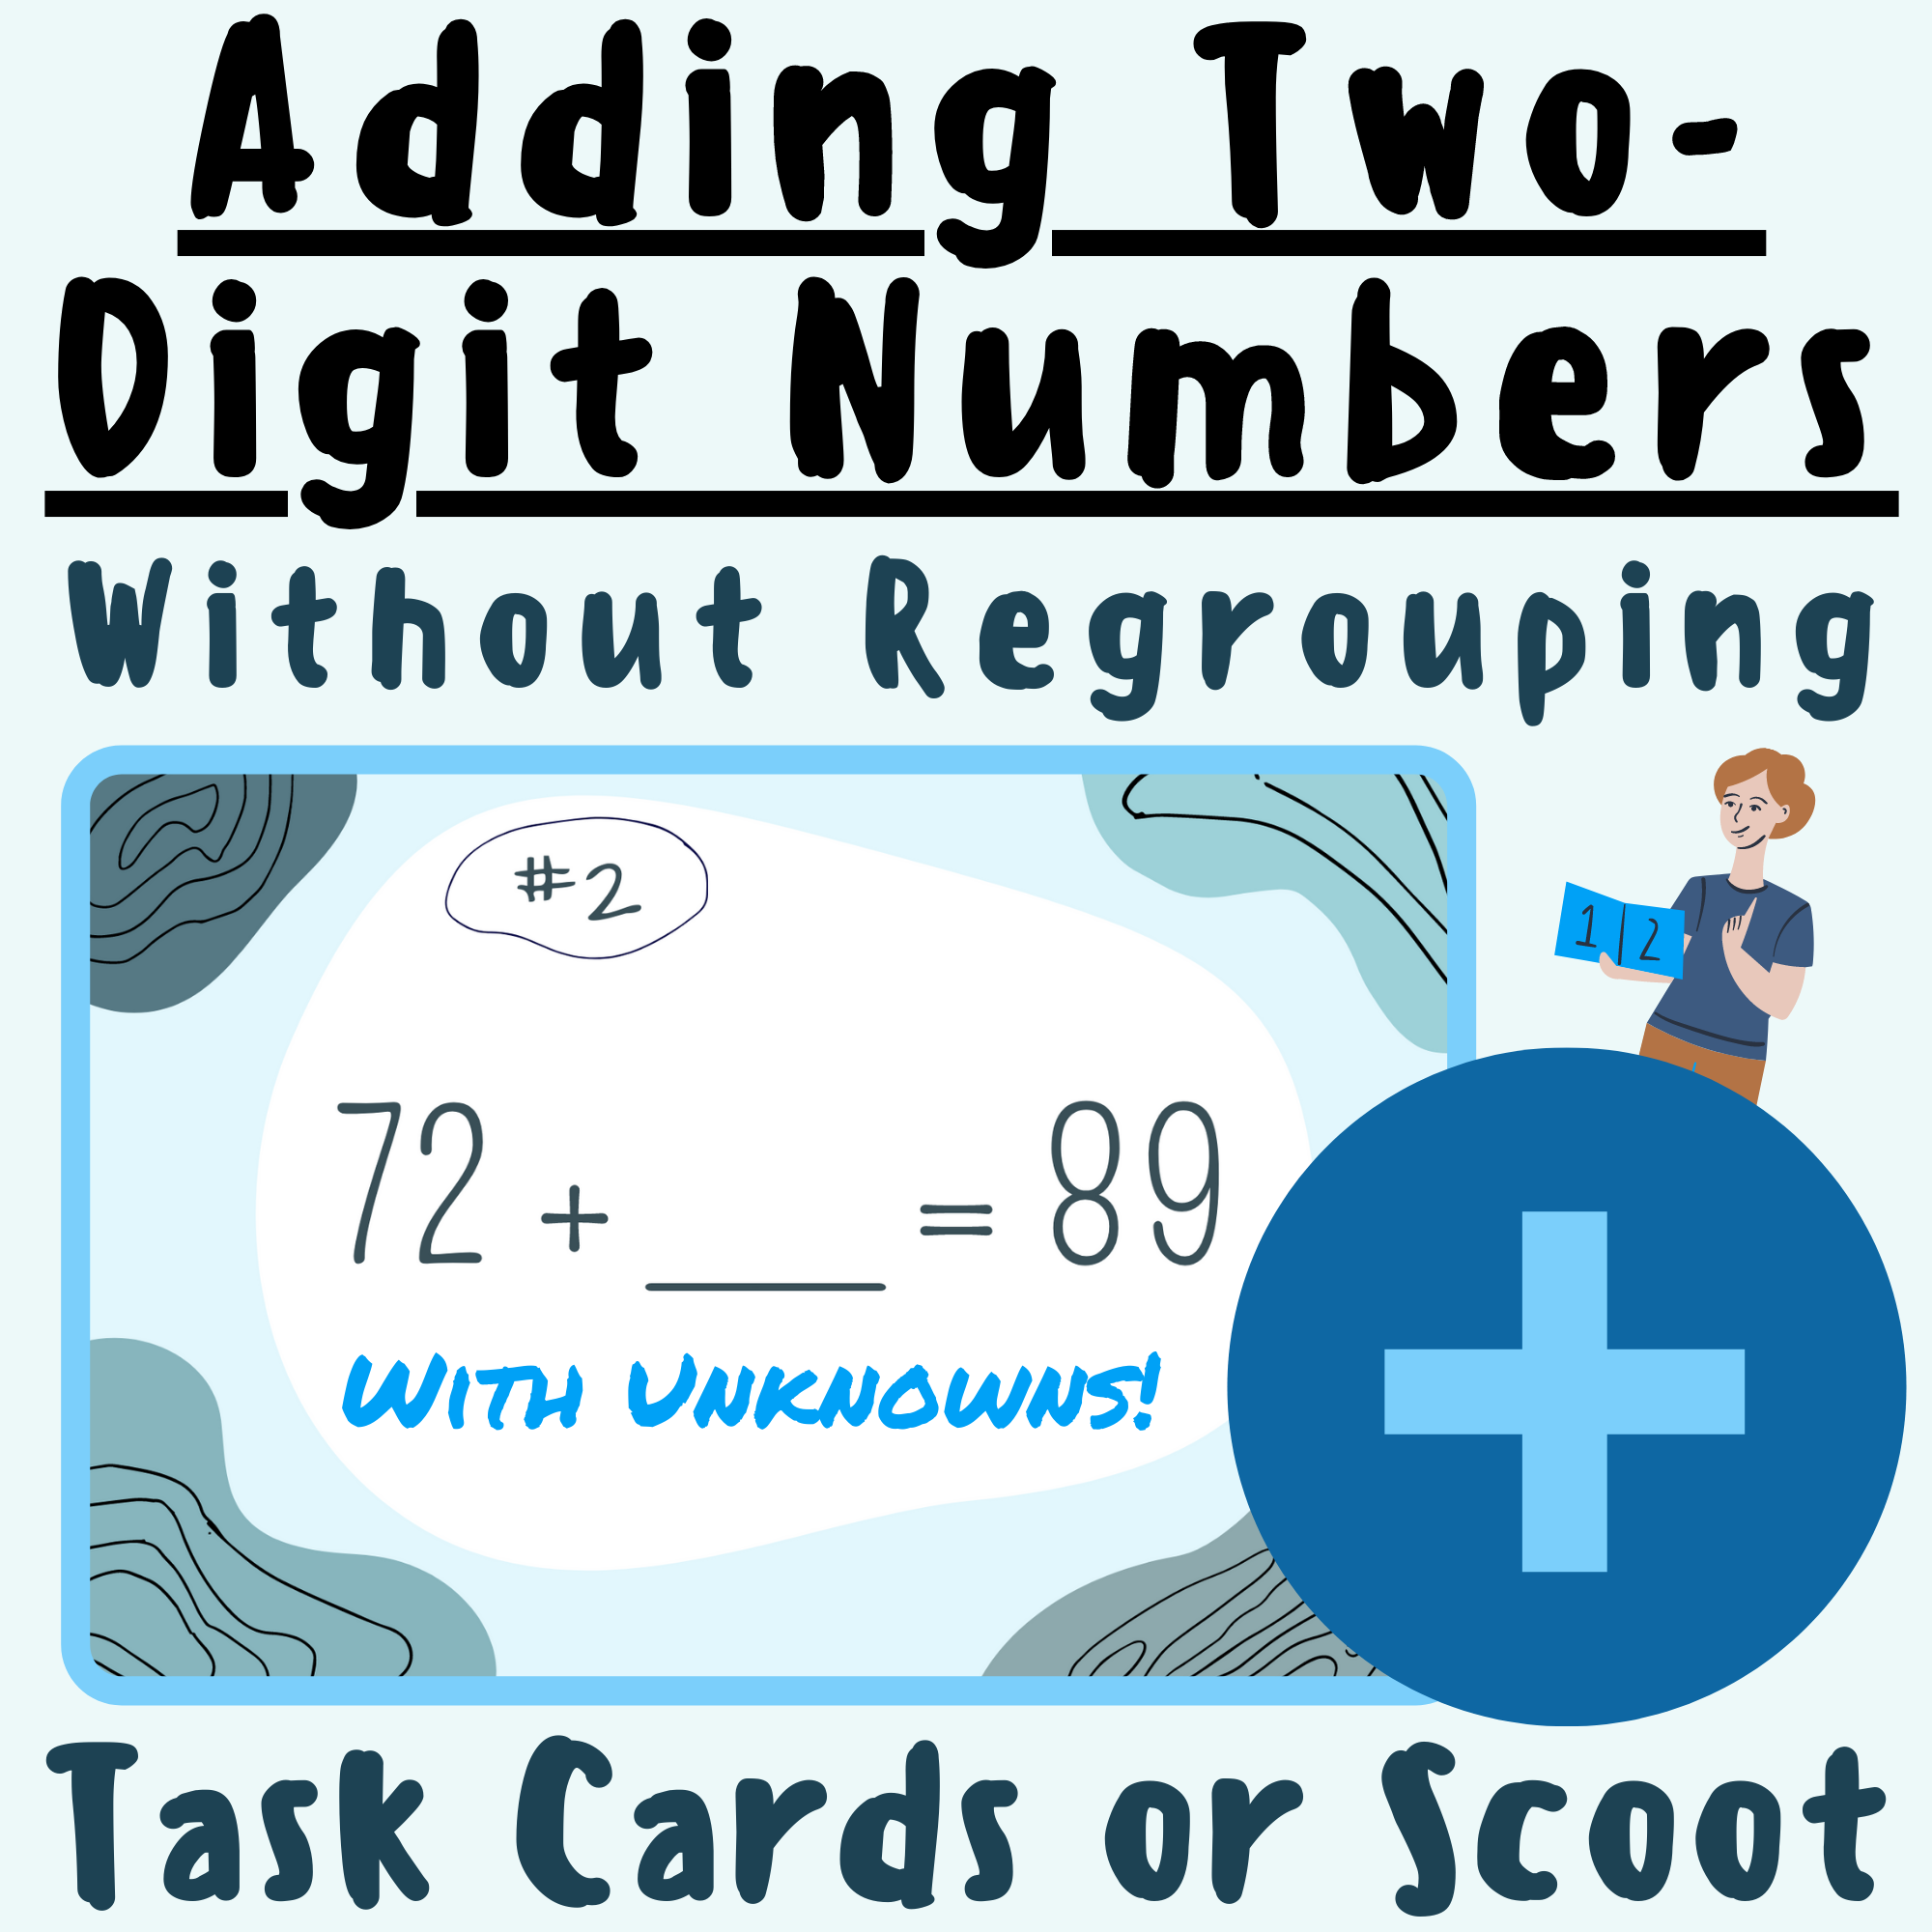 Adding Two-Digit Numbers Without Regrouping and Composing SCOOT or TASK CARD [With Unknowns] For K-5 Teachers and Students in the Math Classroom